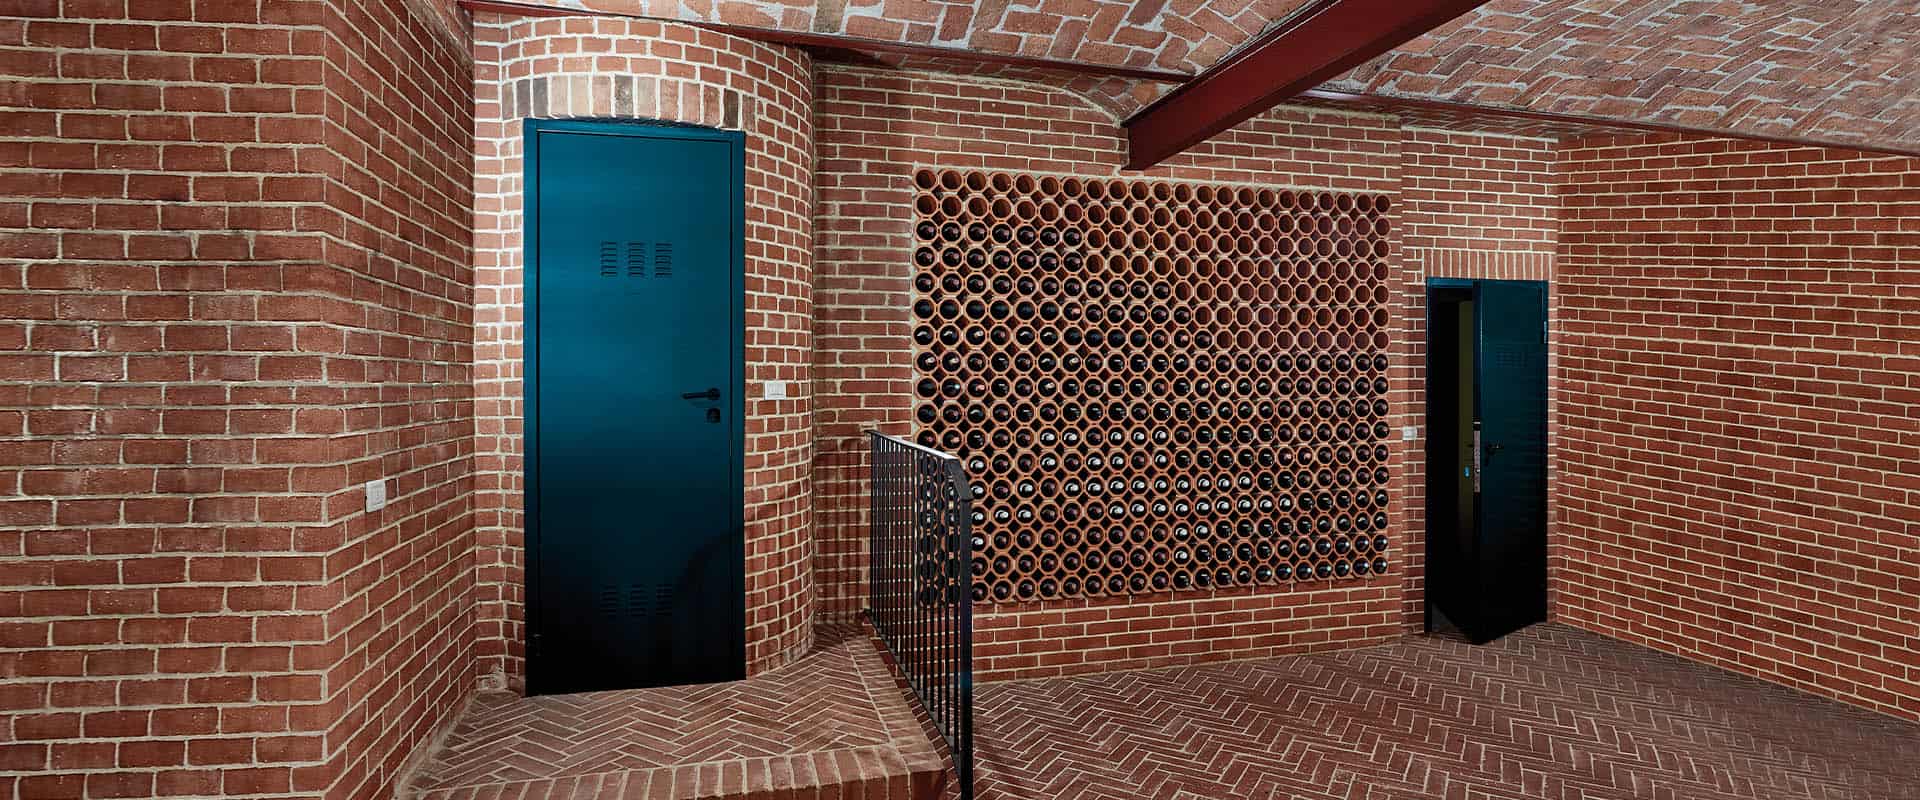 Under. The basement door: protect your most hidden dreams (and more).